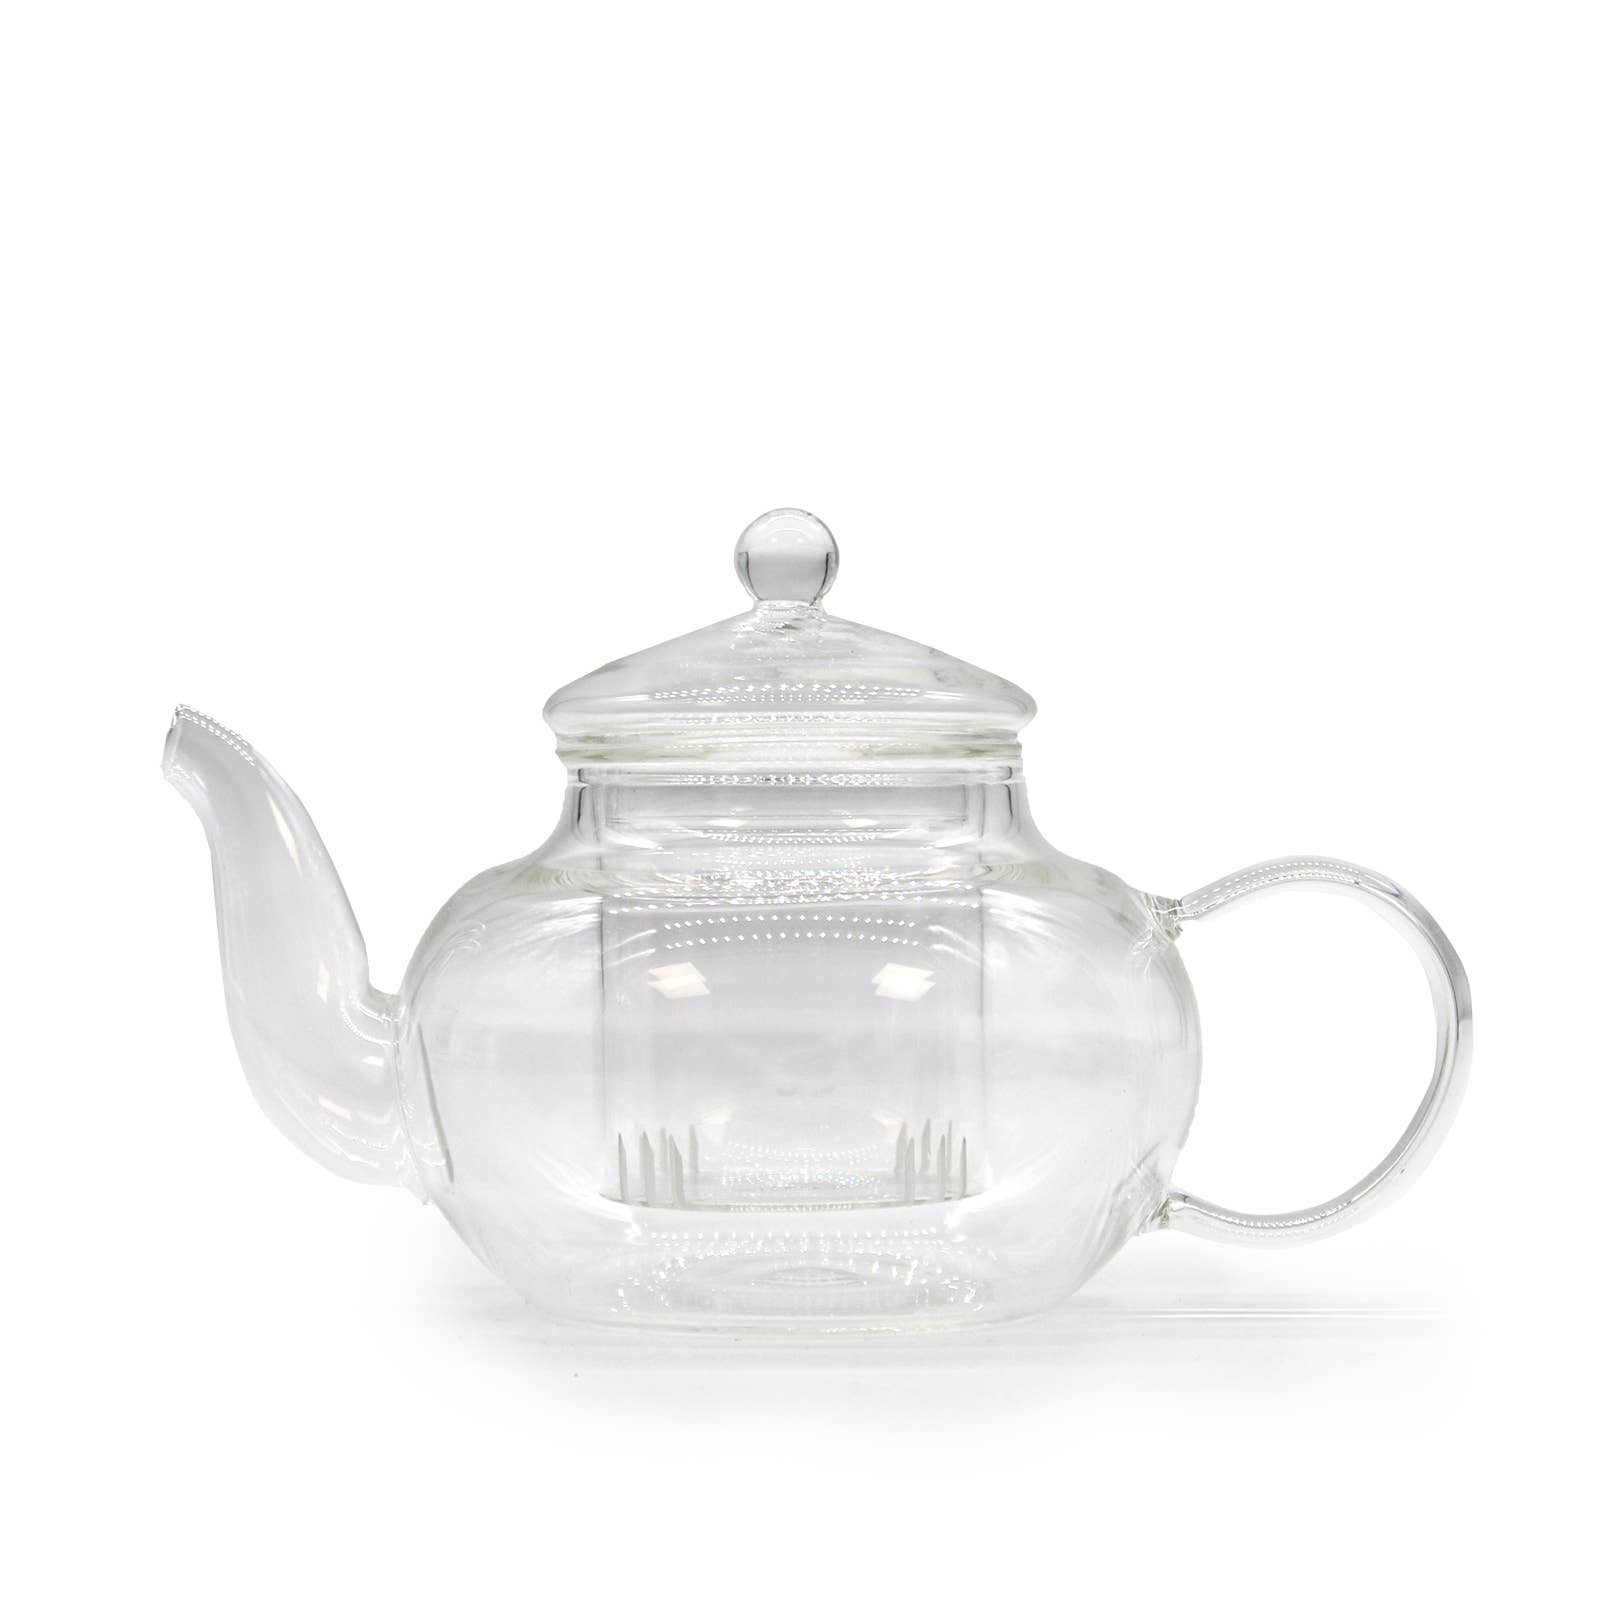 Clear Glass Teapot with Infuser for Loose Leaf Tea 400ml Hexagon Vintage Pot 